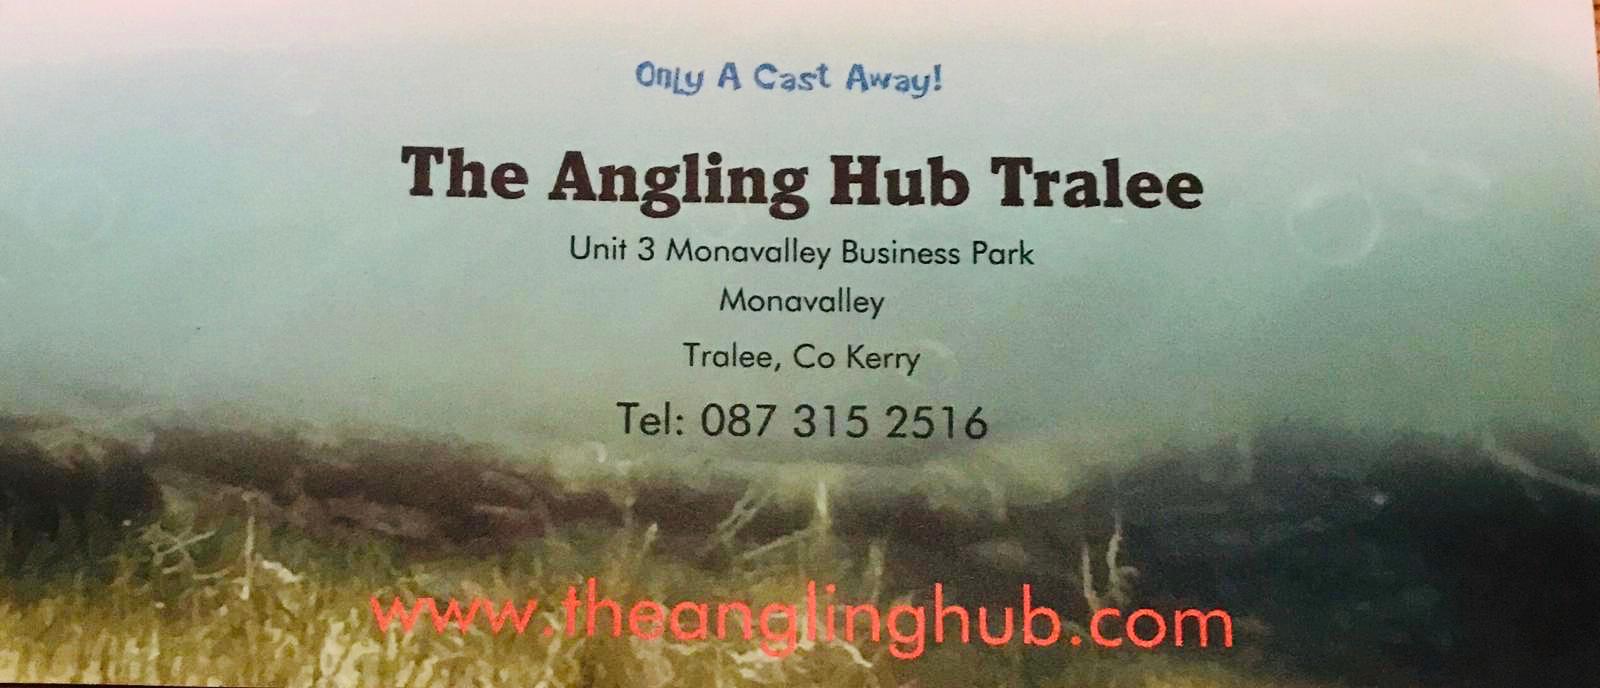 The Angling Hub Tralee